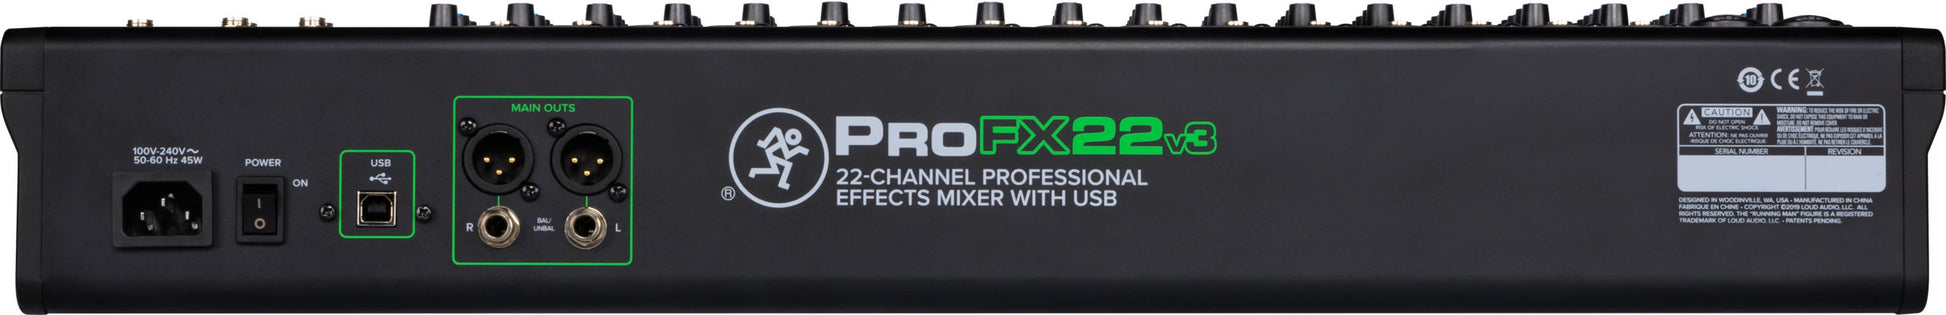 Mackie ProFX22v3 22 Channel 4-bus Professional Effects Mixer with USB - Aron Soitin